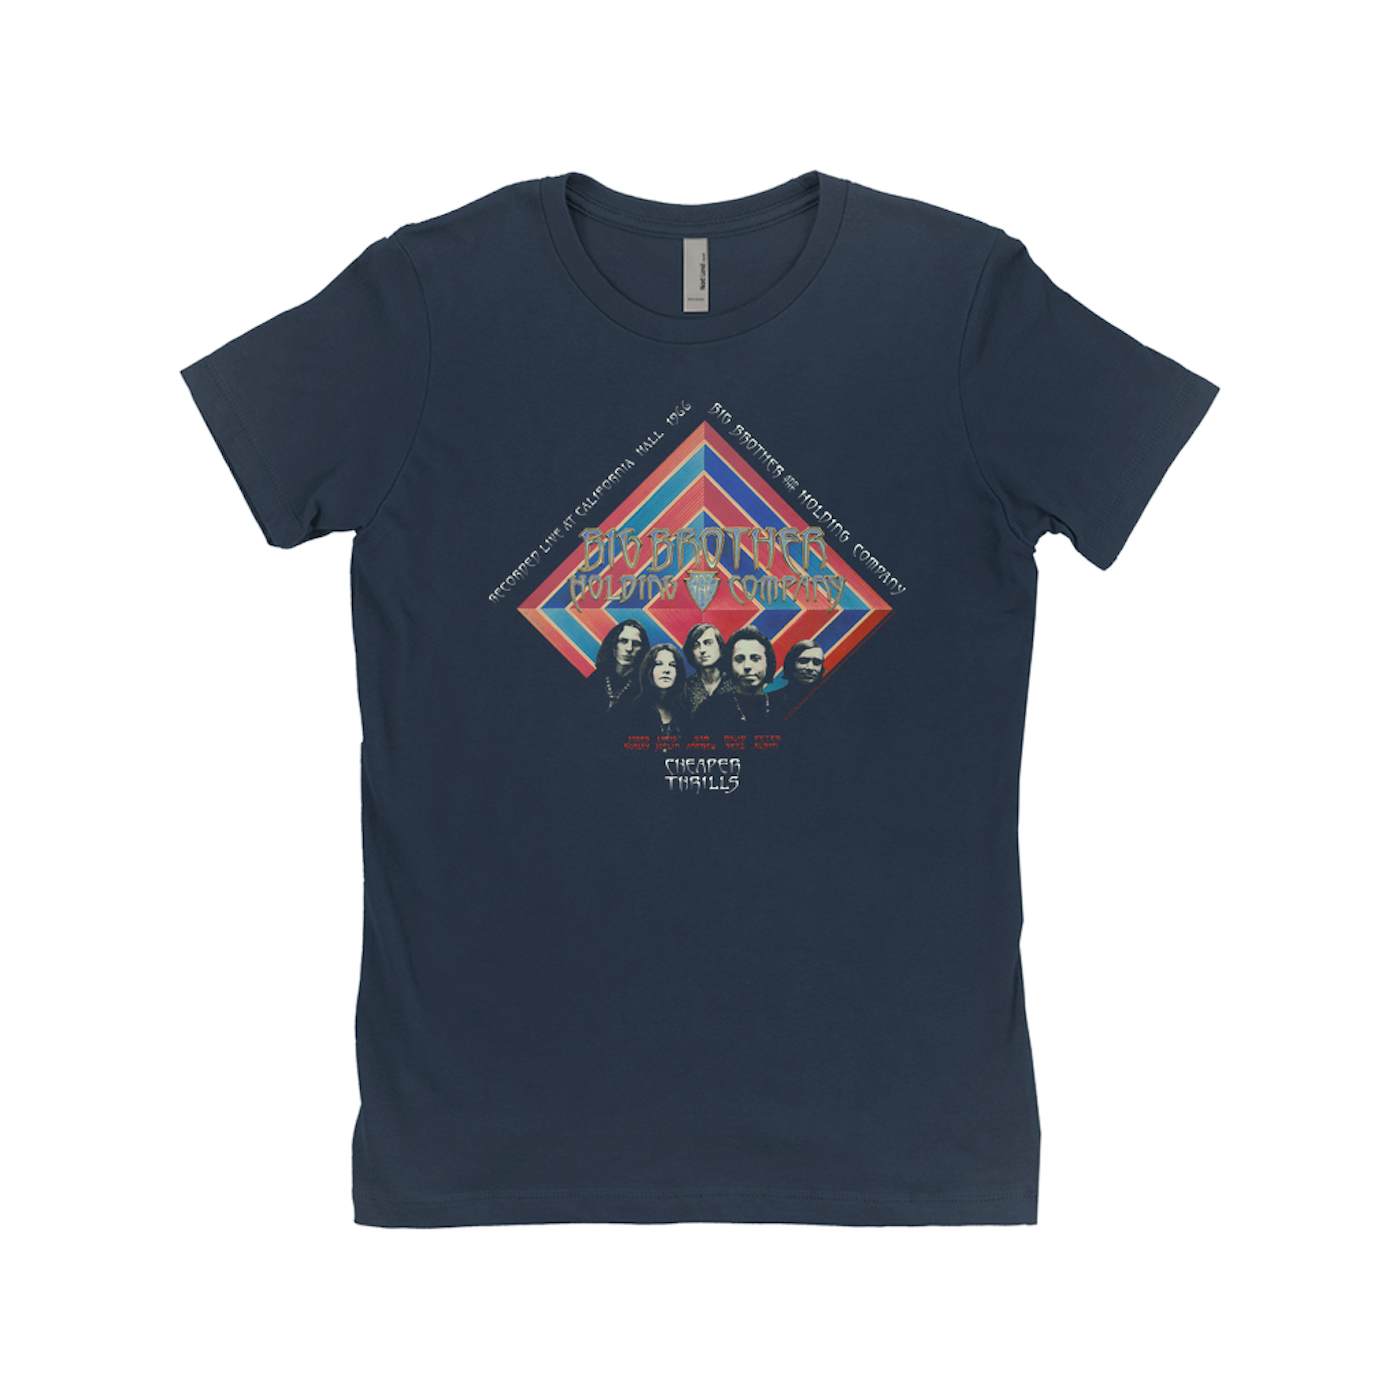 Big Brother & The Holding Company Big Brother and The Holding Co. Ladies' Boyfriend T-Shirt | Cheaper Thrills Album Cover Big Brother and The Holding Co. Shirt